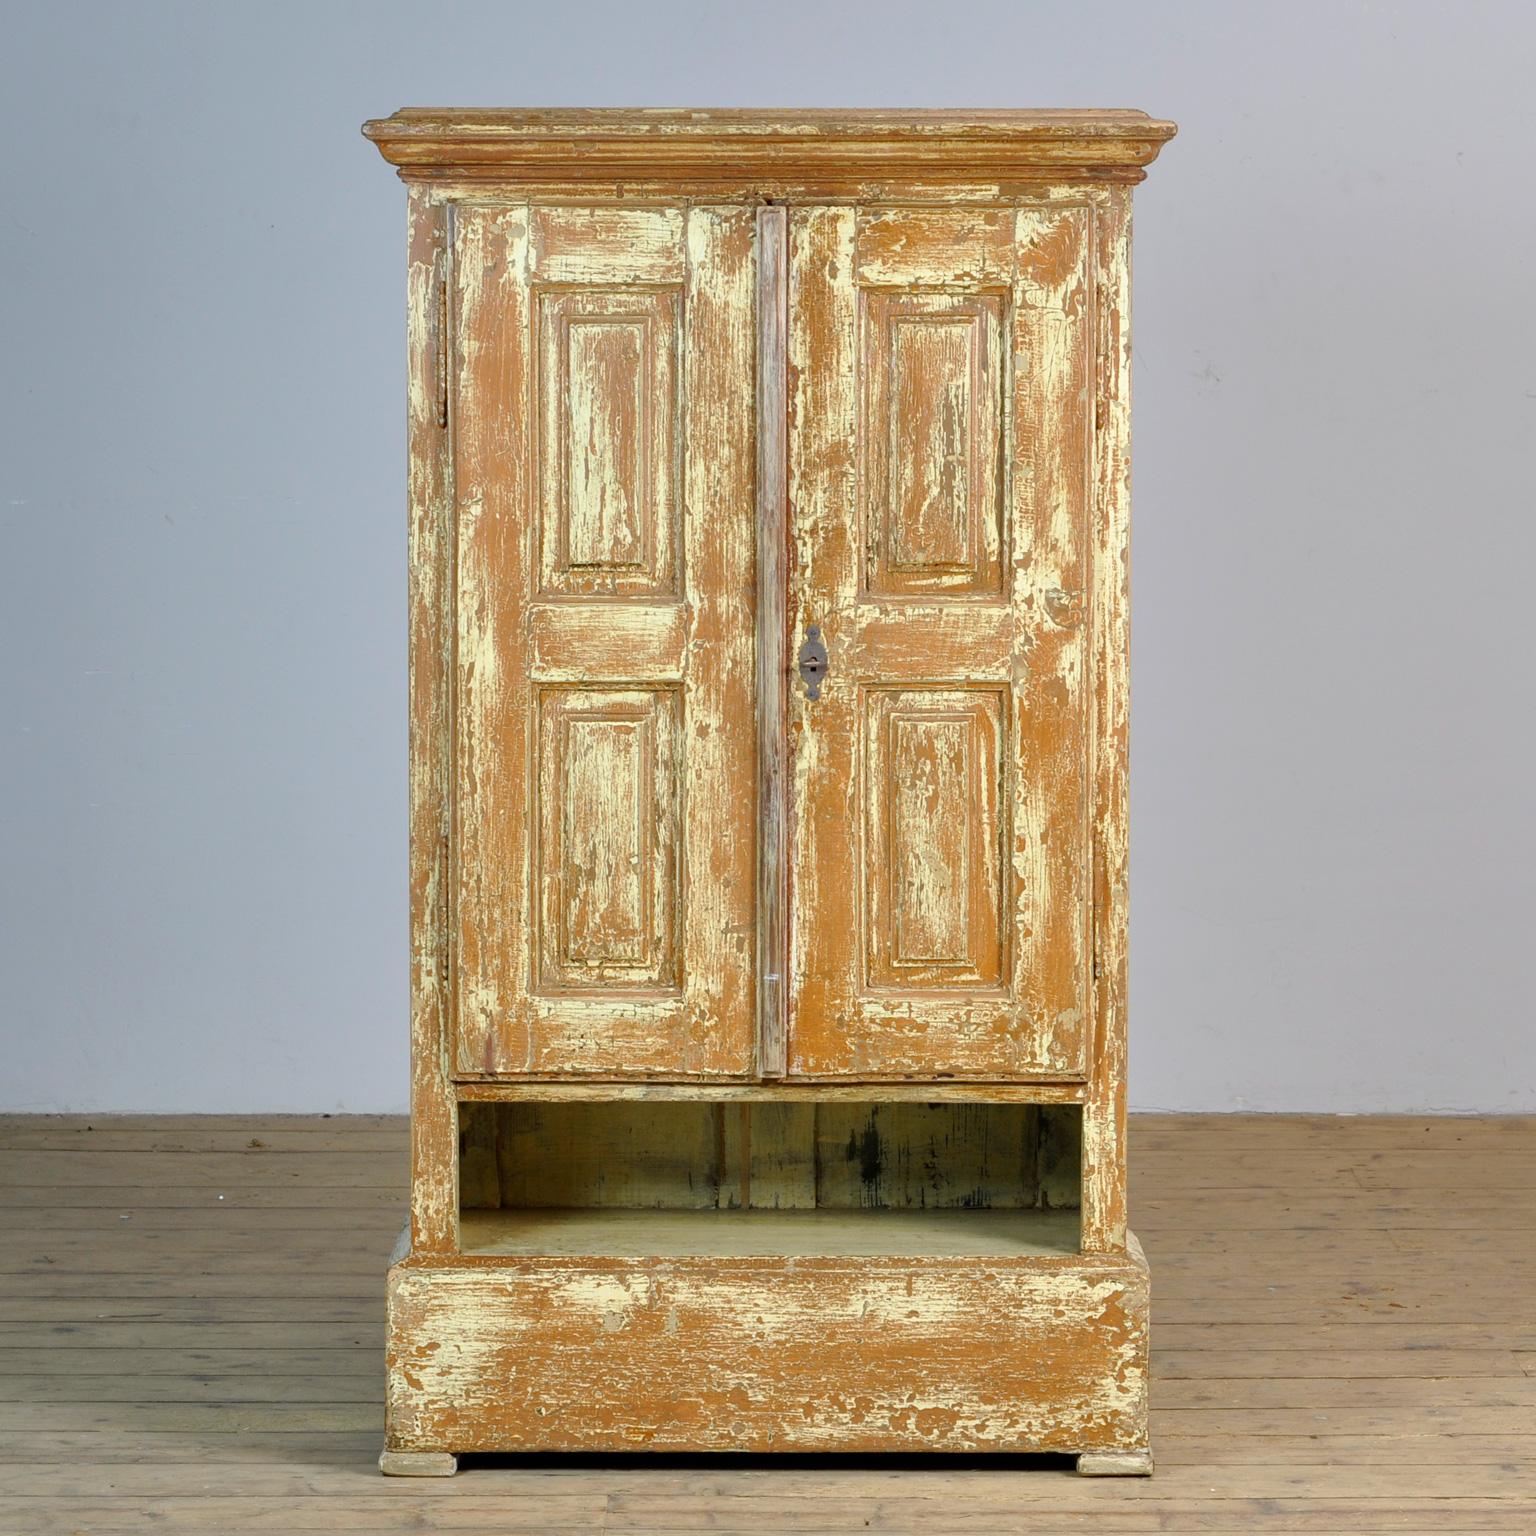 This brocante cabinet comes from Hungary, circa 1920. It is made of pine wood and has acquired a weathered patina over the years, inside it has five shelves. With well-functioning lock/key.